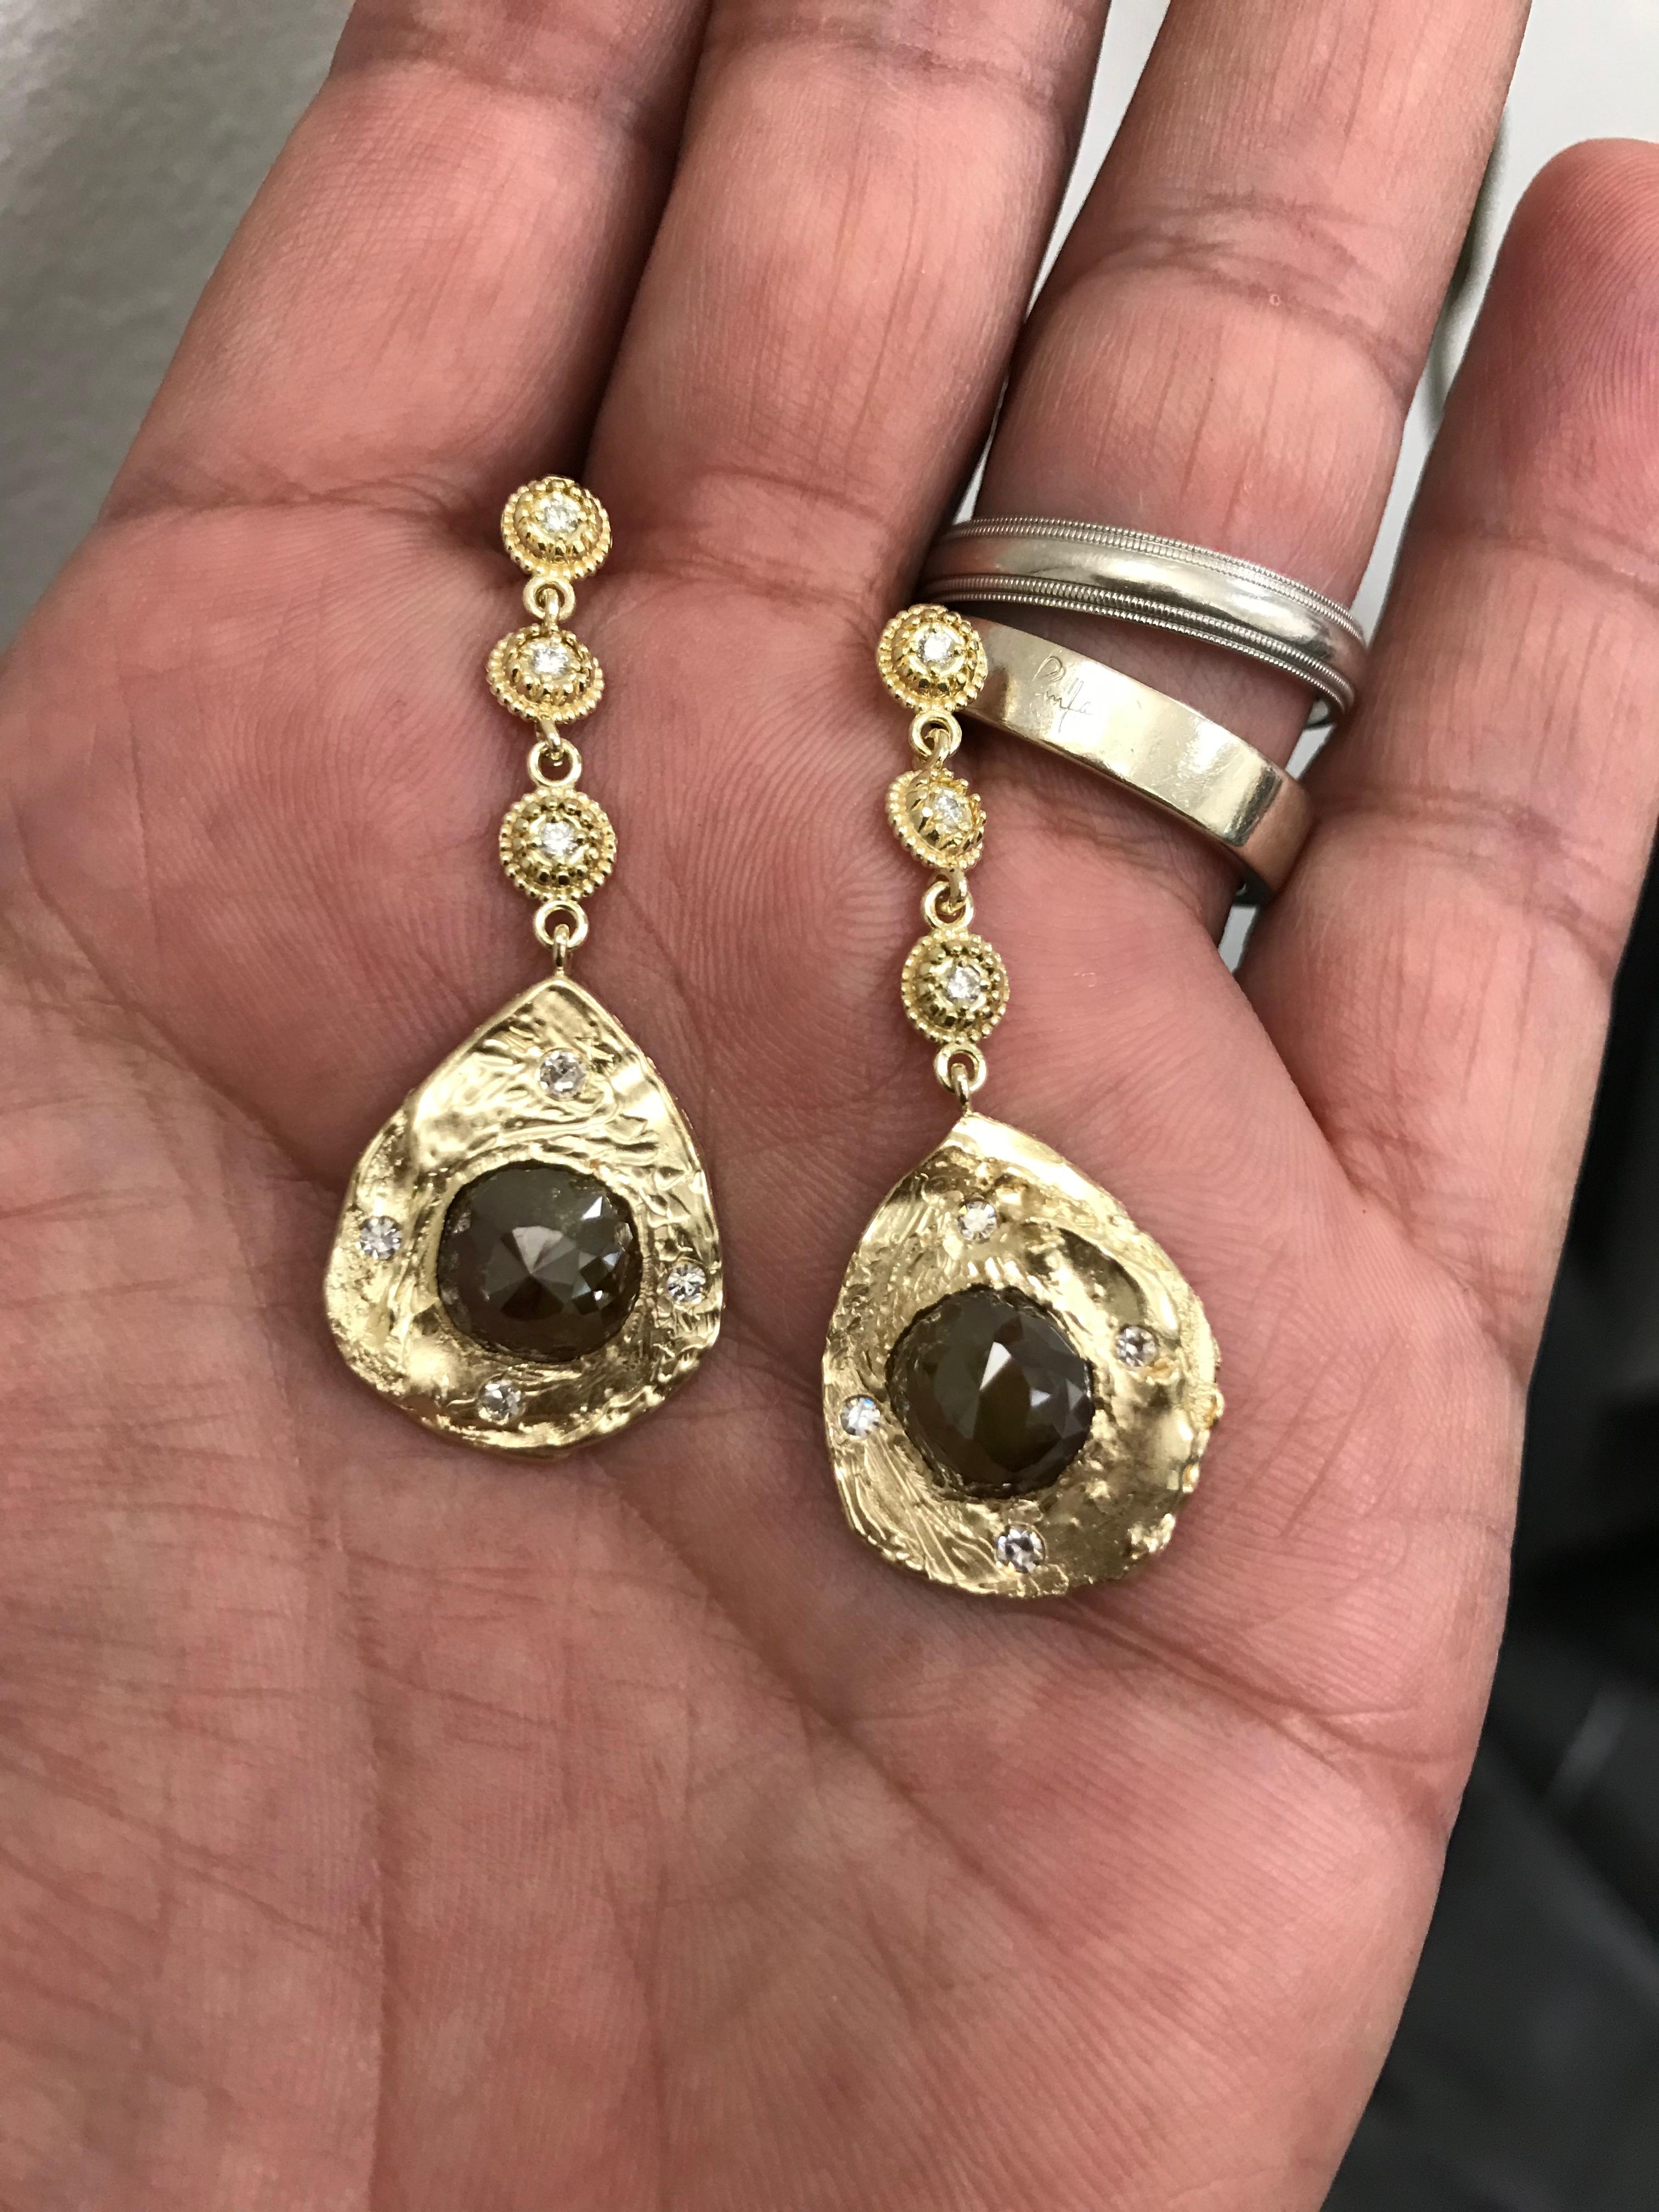 Natural Color Cushion Rosecut Diamond Earrings set in 18k Yellow gold designed by Amyn The Jeweler

Pair of Cushion Diamonds 4.72 cts. 

14 diamonds 0.44cts. 

Total Diamond weight 5.16cts

Passionately Created and Made in Los Angeles.

Model: